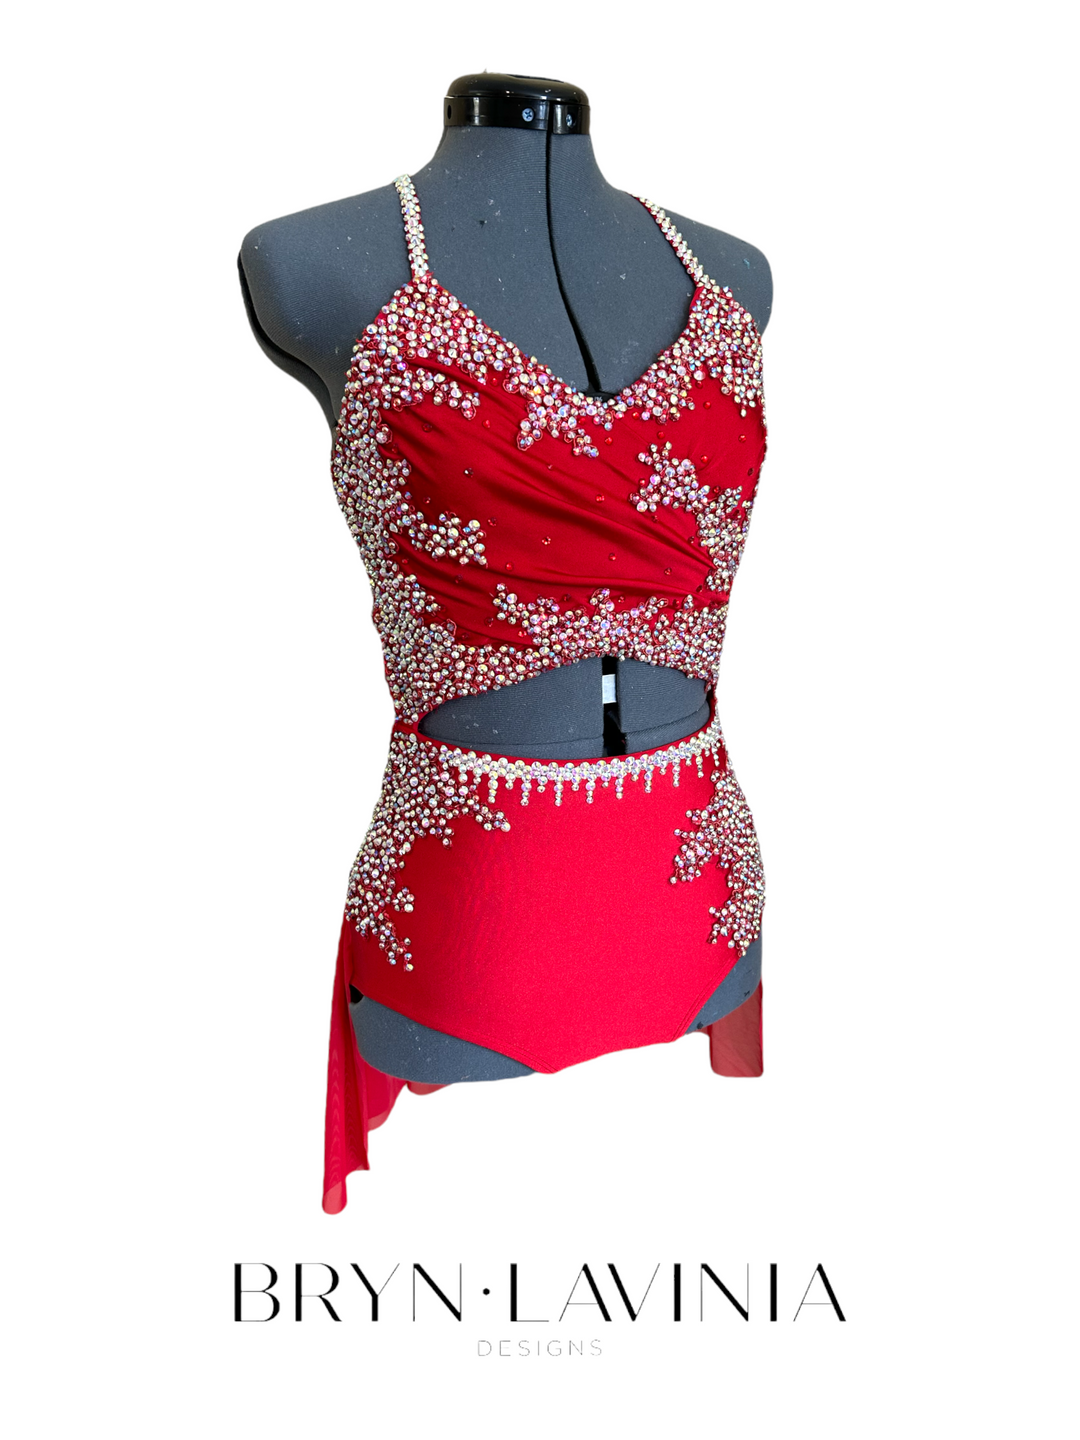 NEW Adult S/M Red ready to ship costume